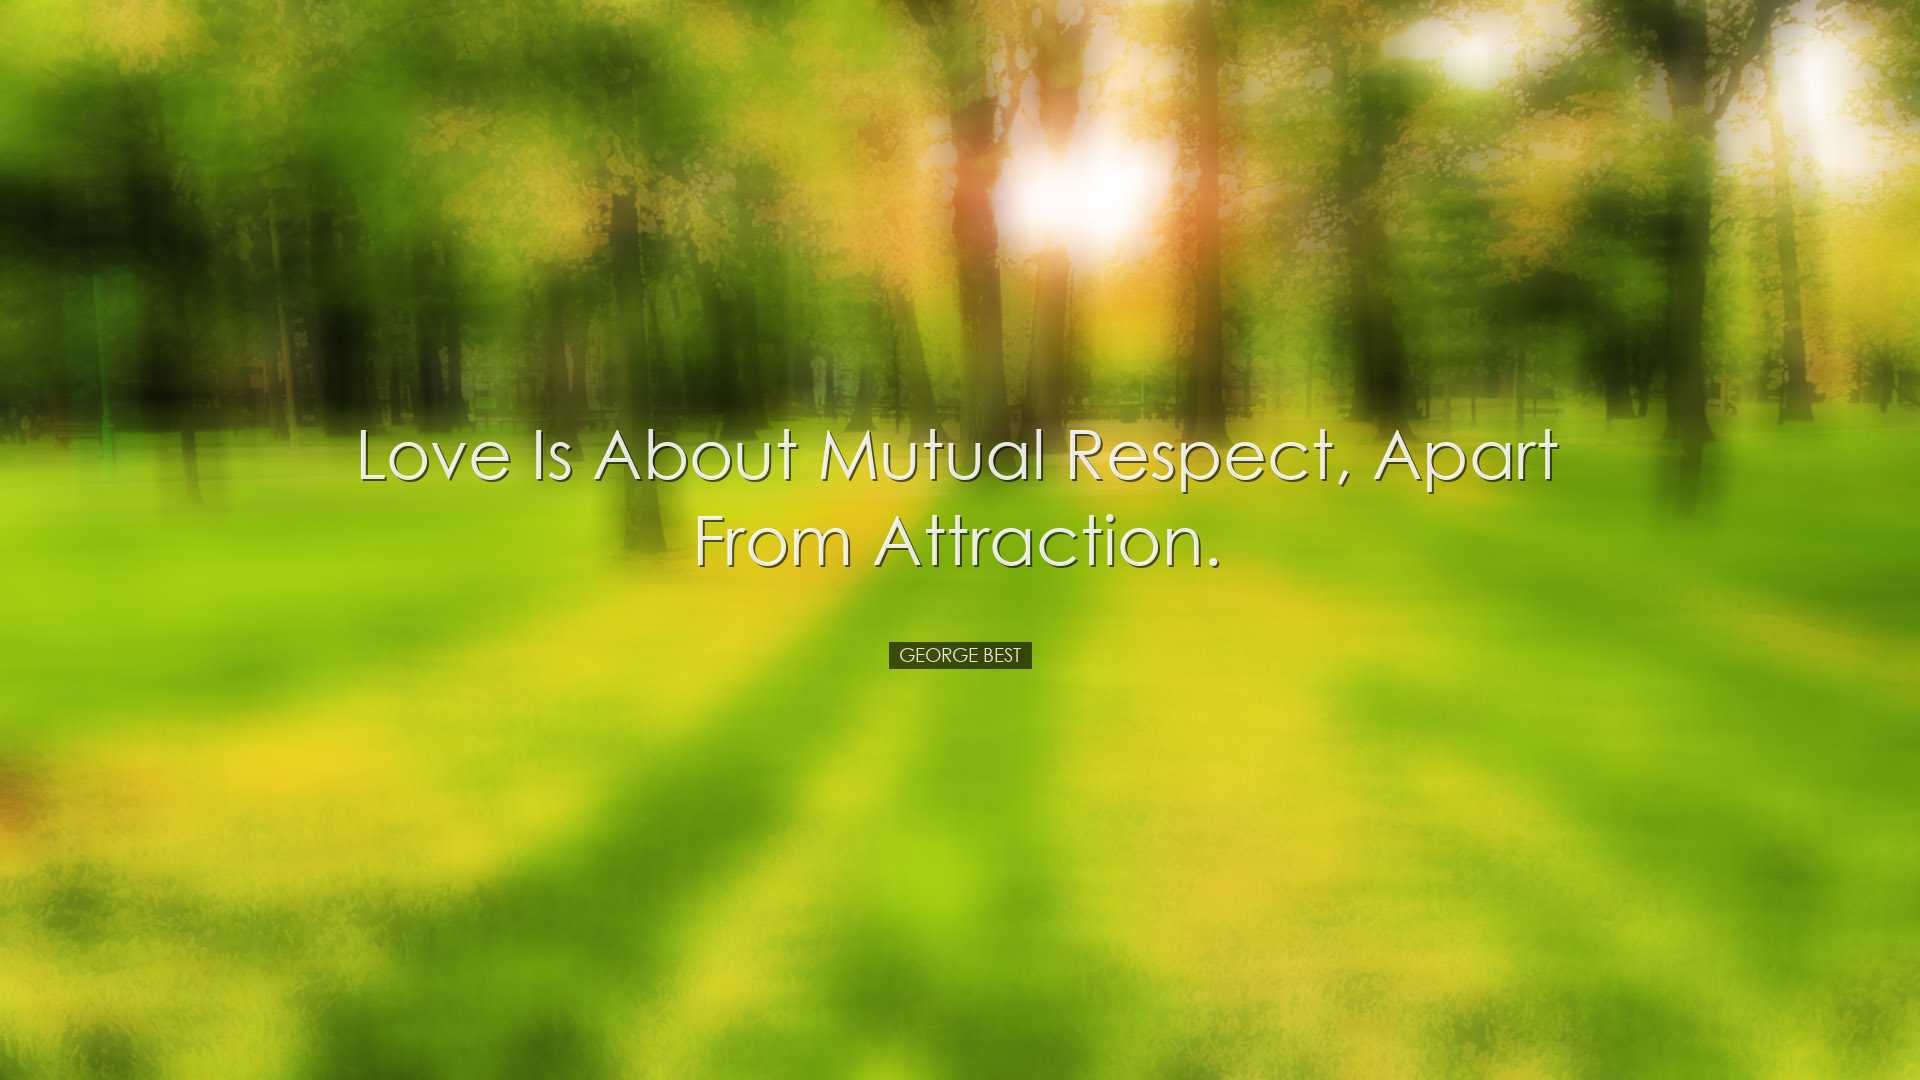 Love is about mutual respect, apart from attraction. - George Best